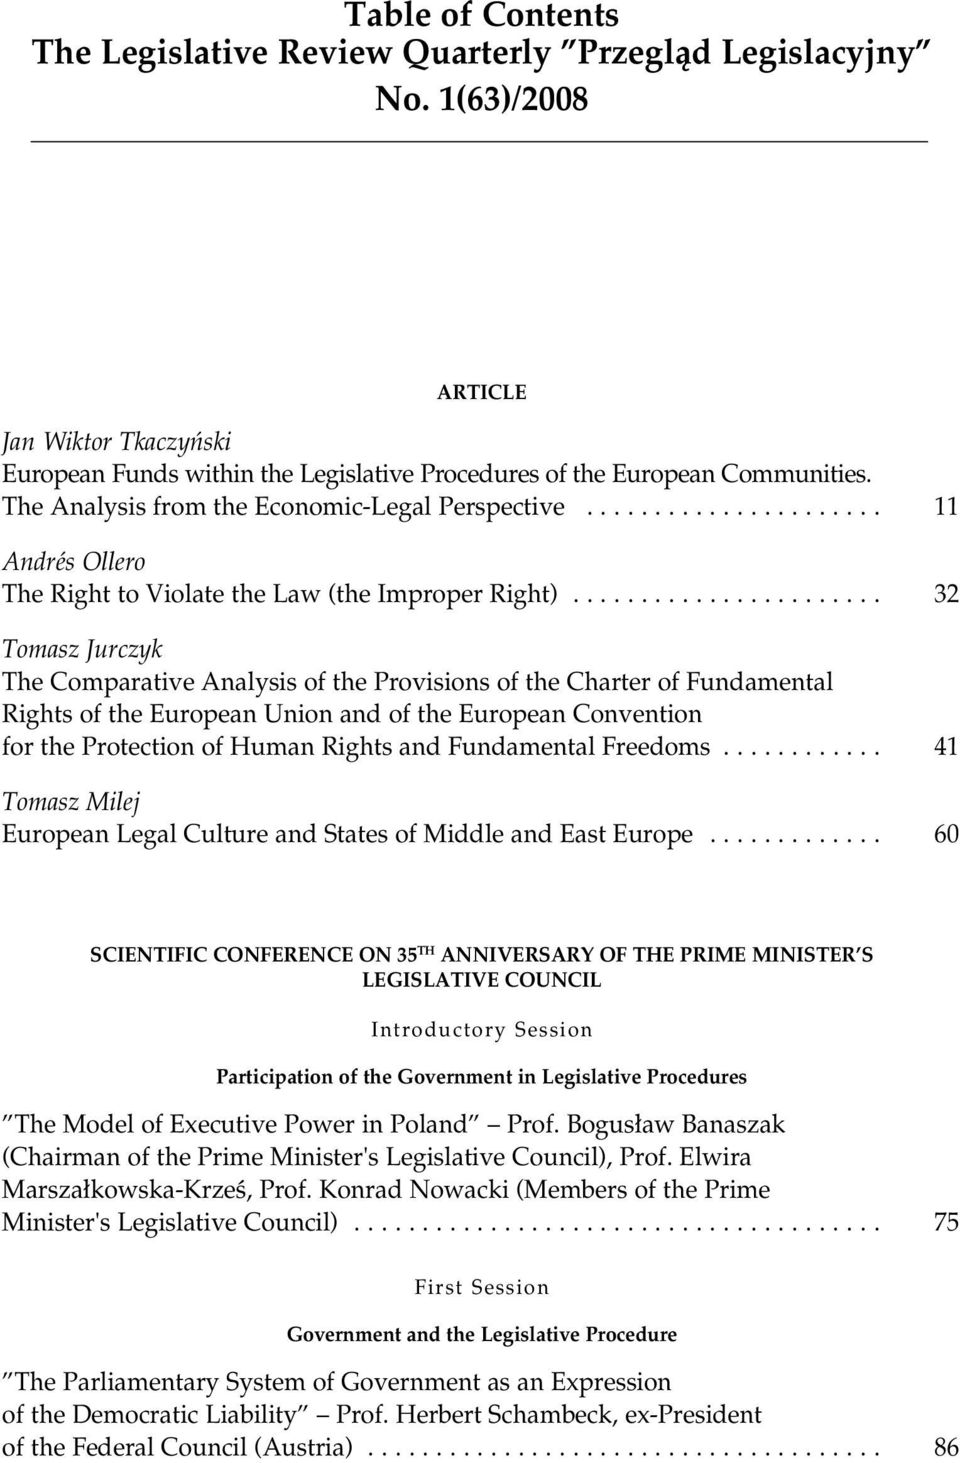 ...................... 32 Tomasz Jurczyk The Comparative Analysis of the Provisions of the Charter of Fundamental Rights of the European Union and of the European Convention for the Protection of